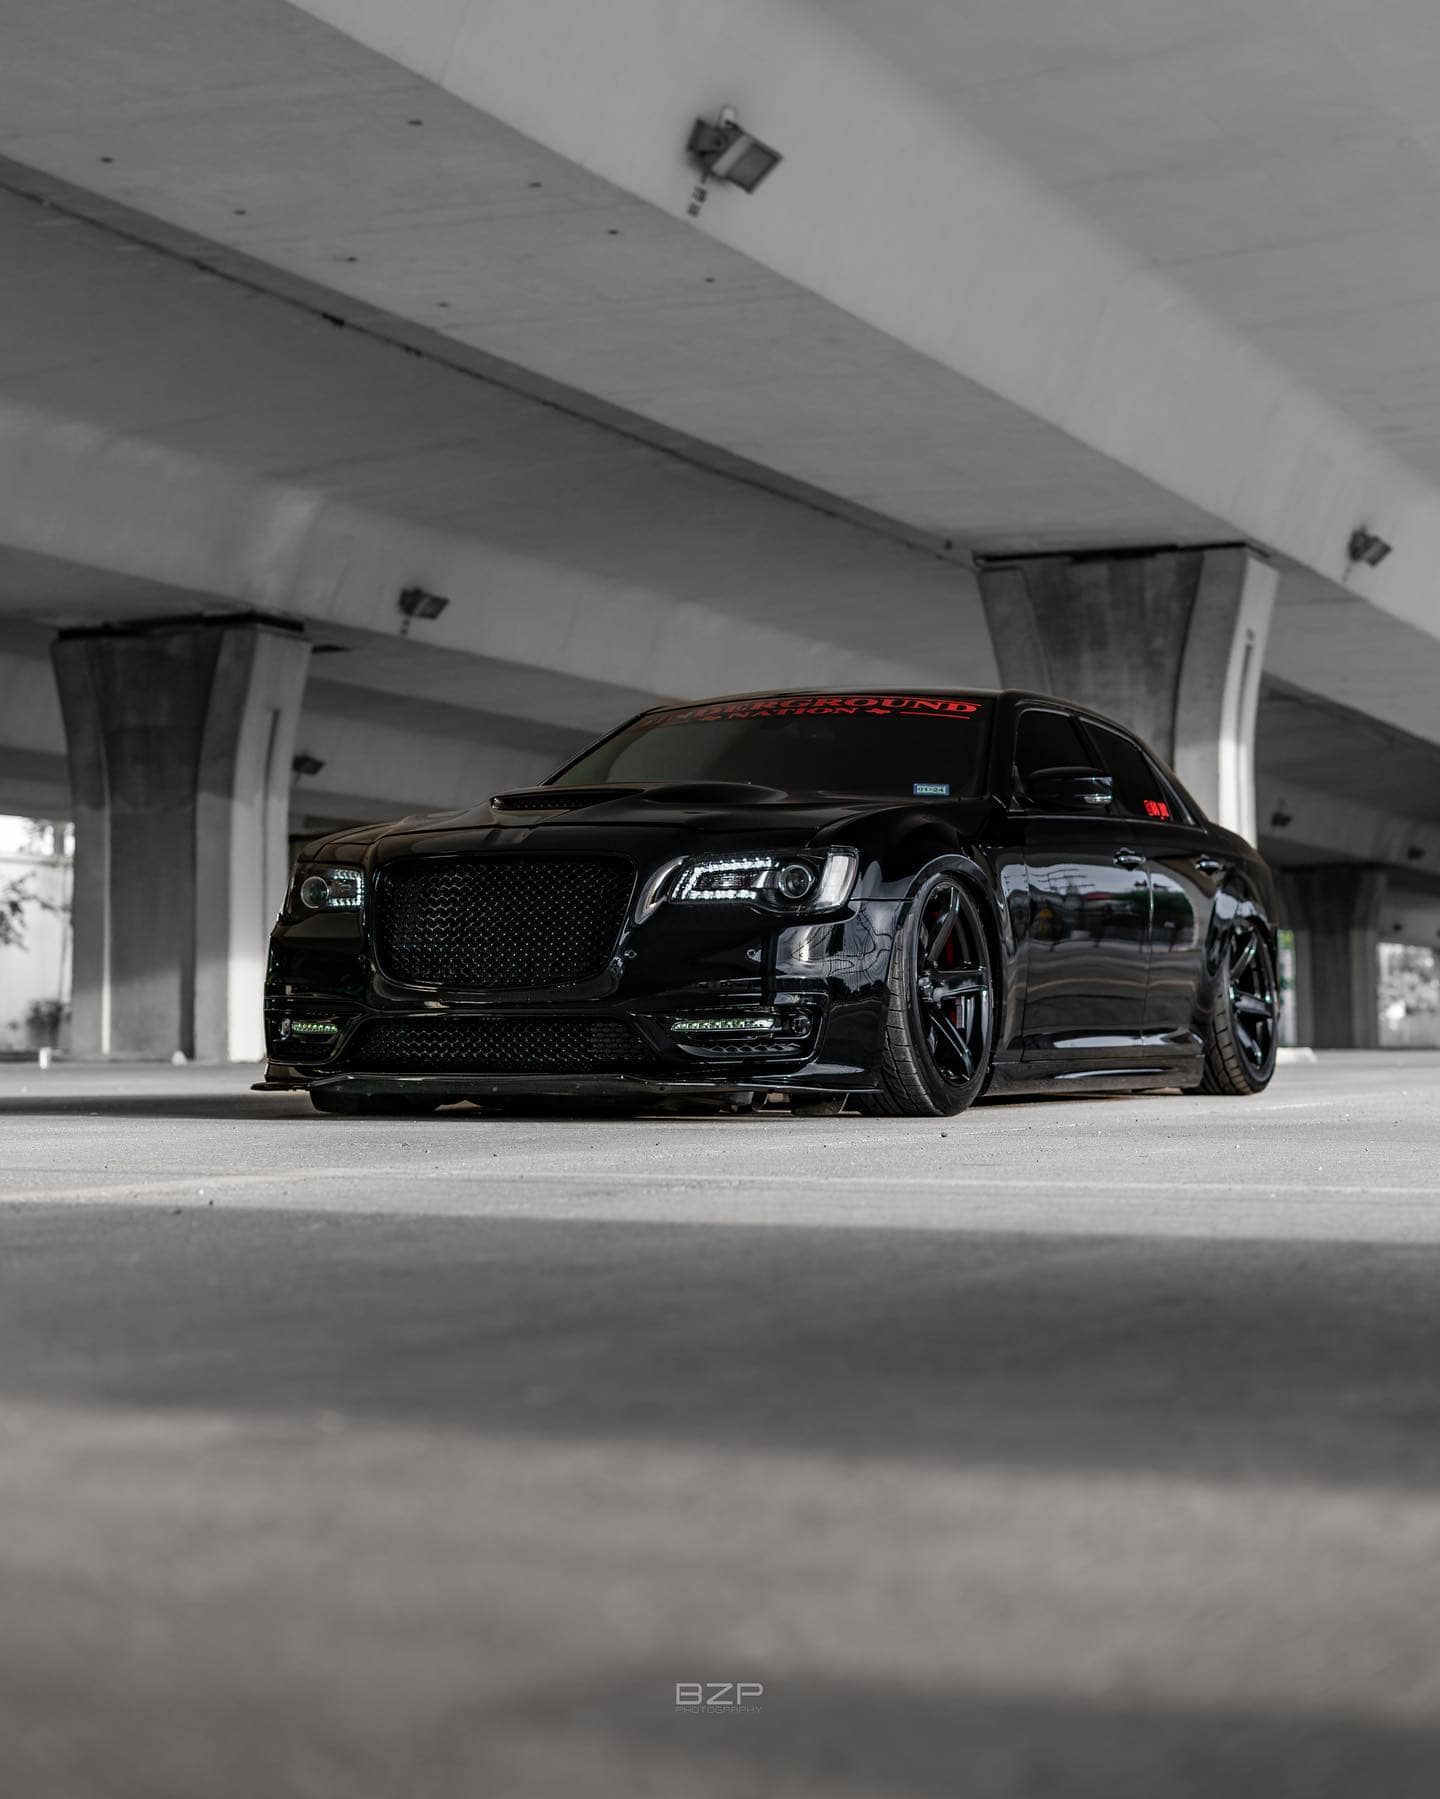 2021 Chrysler 300 s fully blacked out with SRT grille and black LED custom headlights